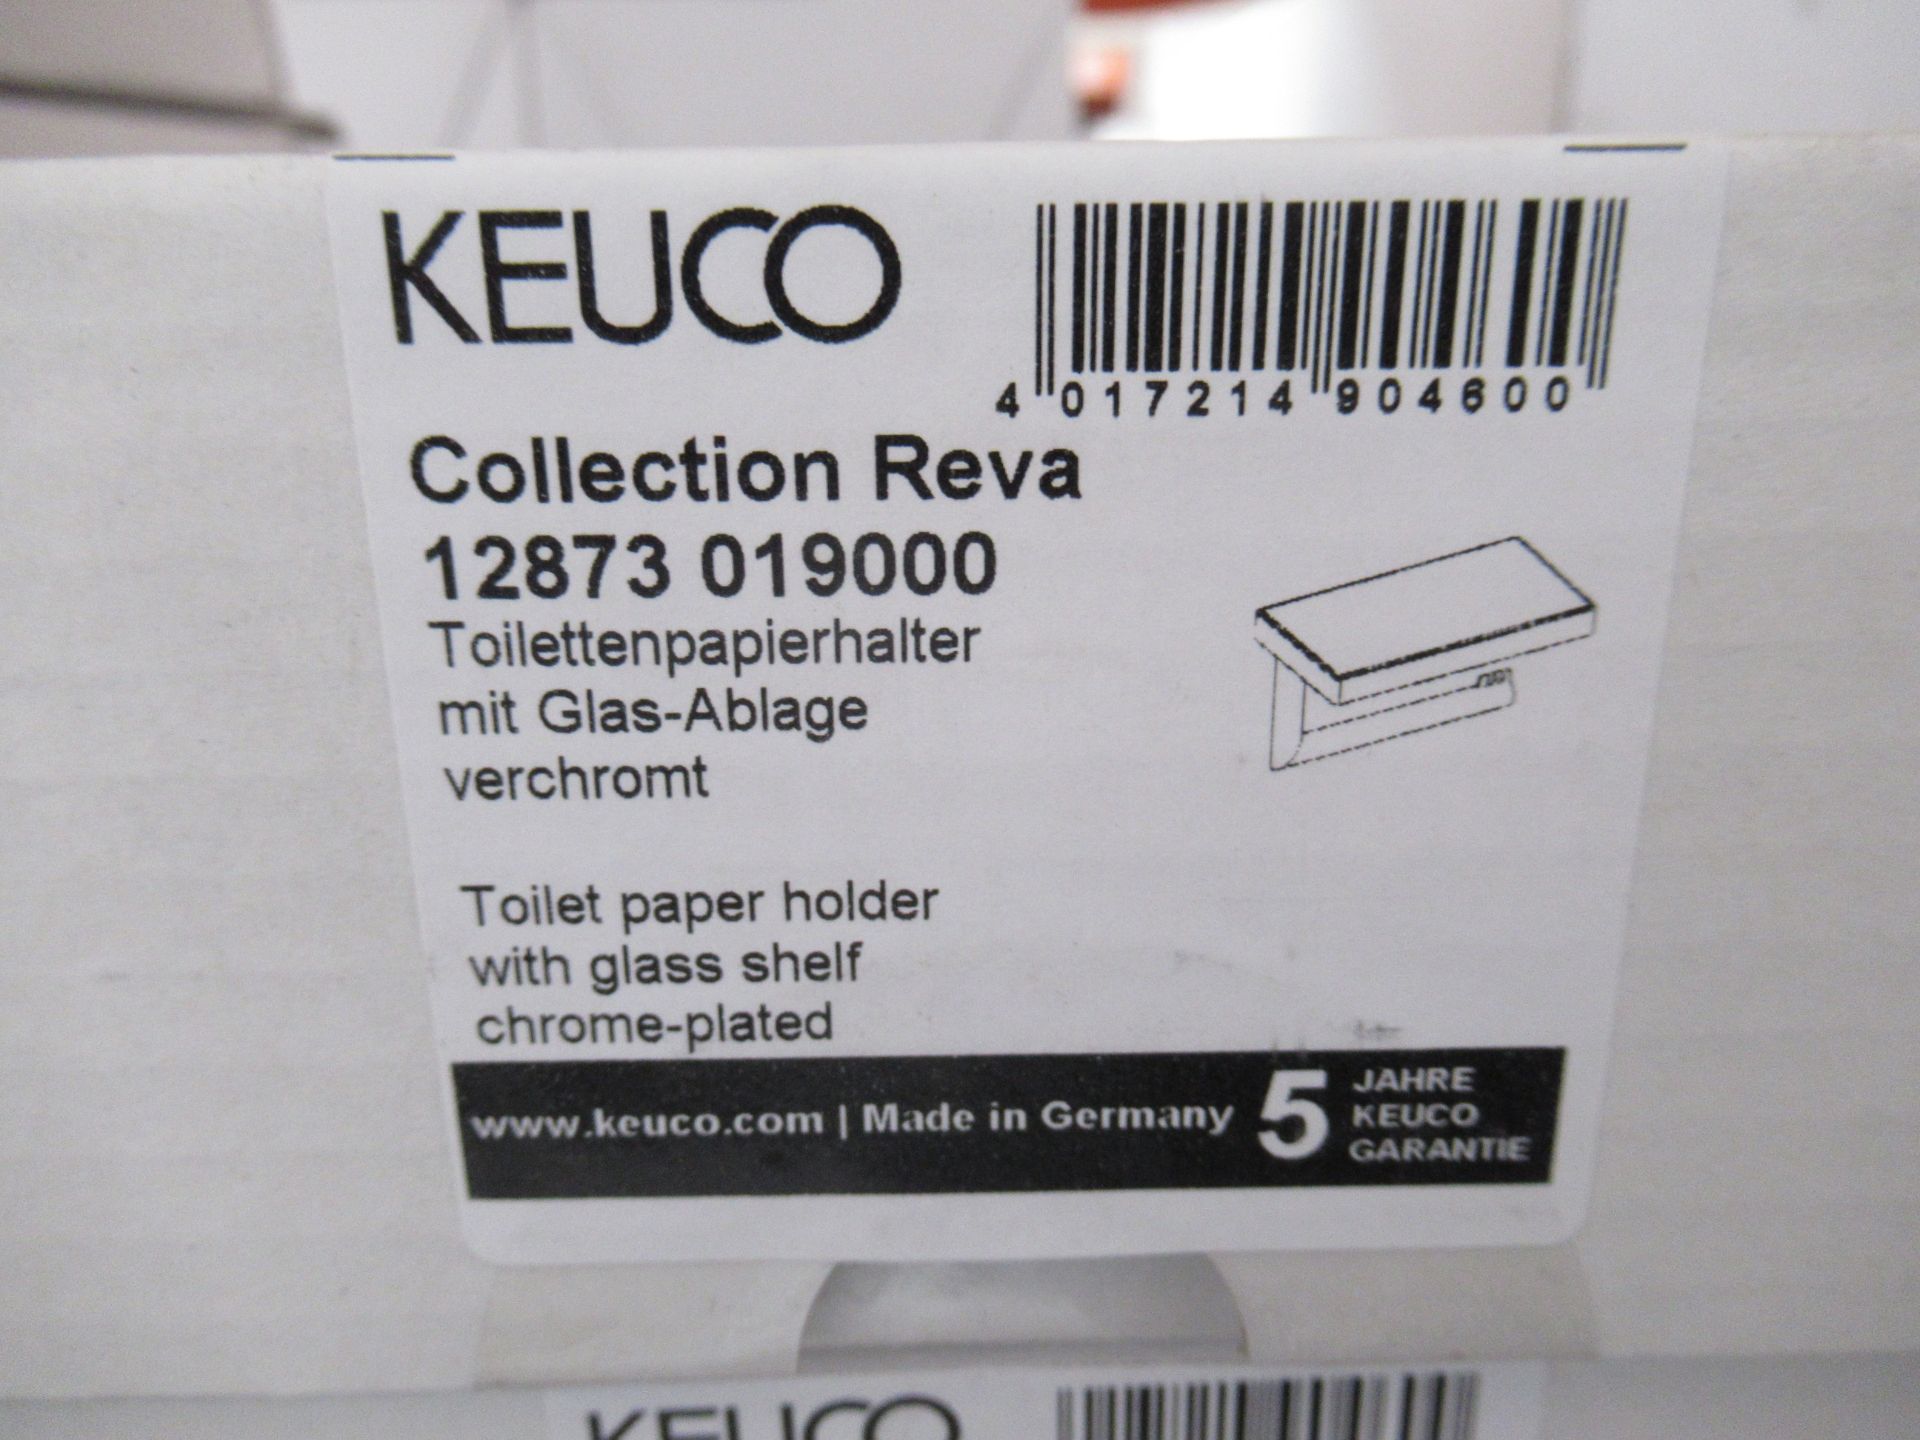 2 x Keuco Collection Reva Toilet Paper Holders, Chrome Plated, P/N 12873-019000 - Image 2 of 2